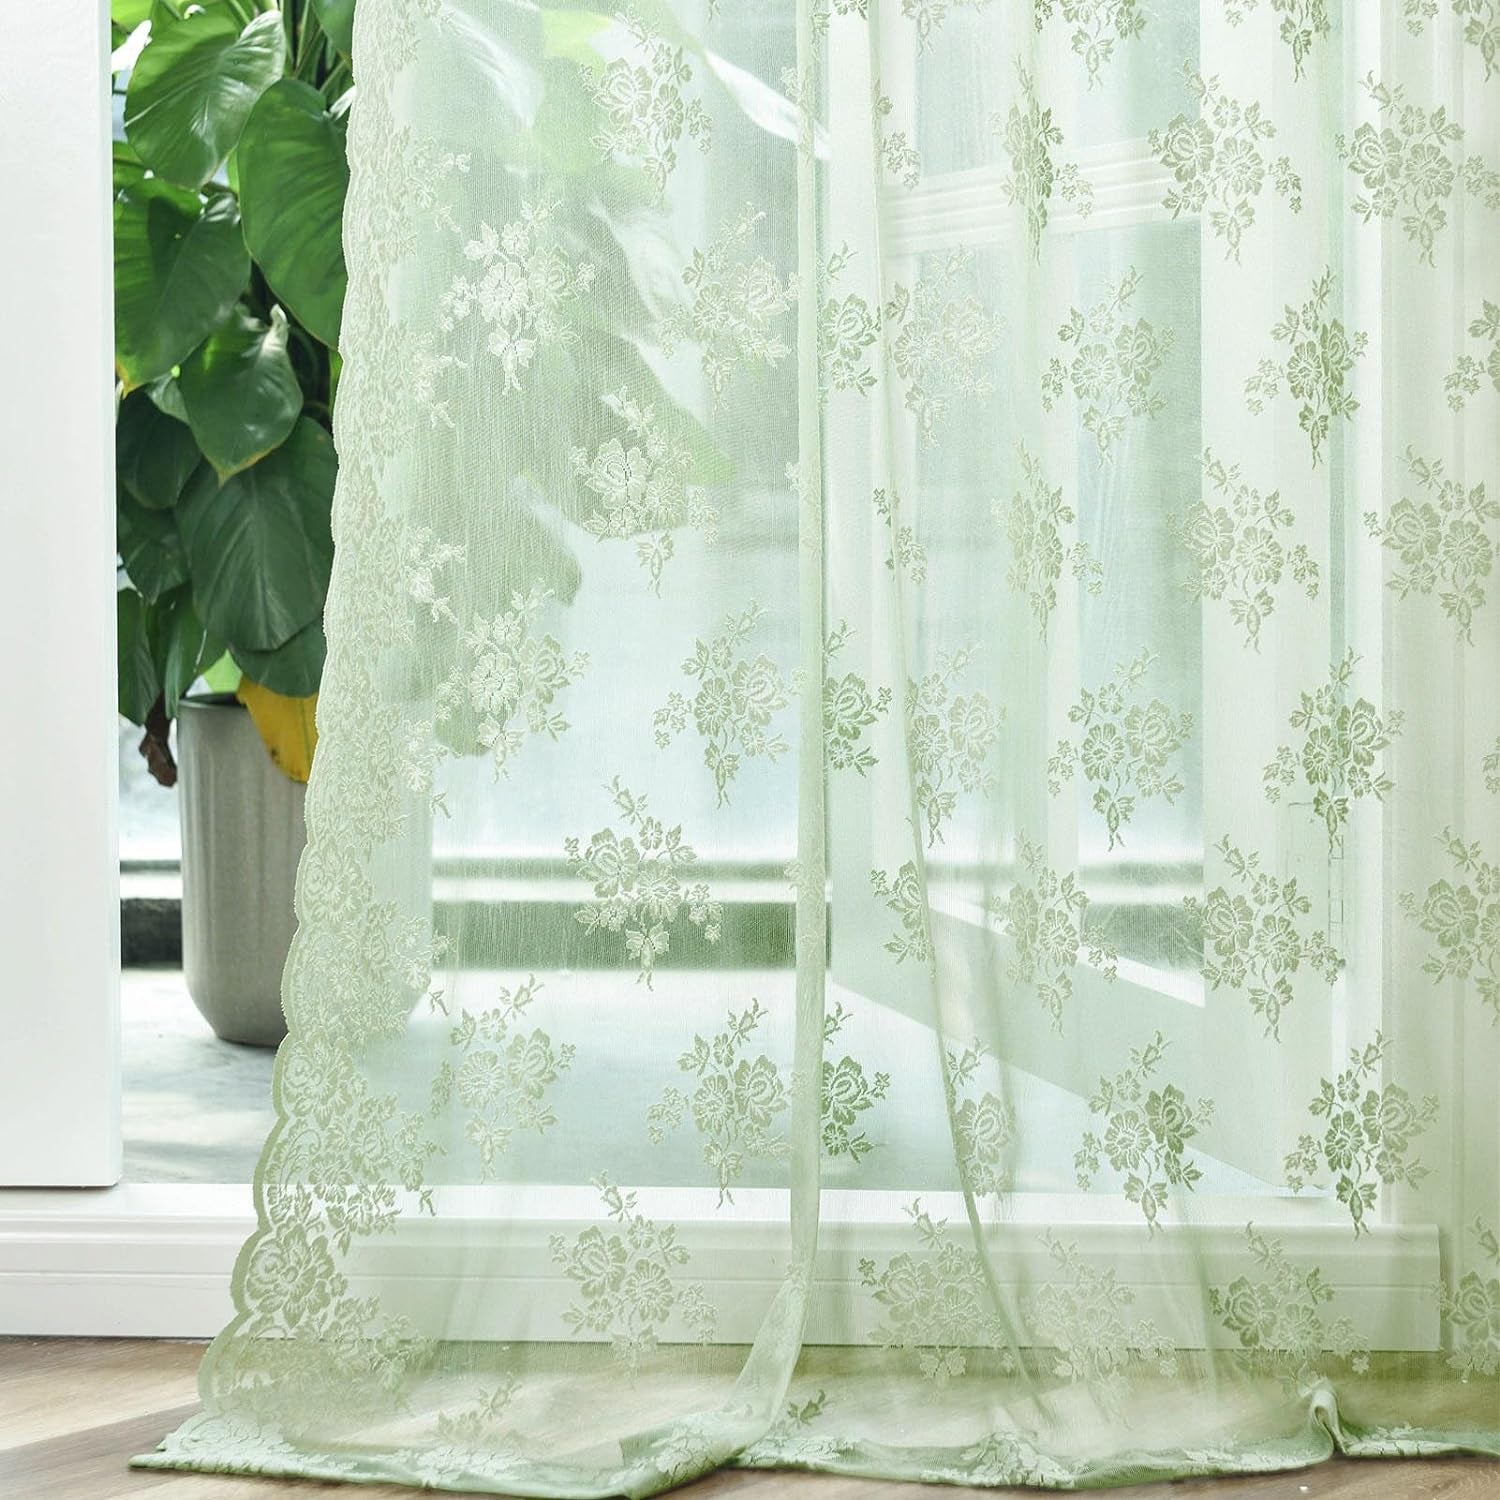 Kotile Sage Green Sheer Valance Curtain for Windows, Rustic Floral Spring Sheer Window Valance Curtain 18 Inch Length, Light Filtering Rod Pocket Lace Valance, 52 X 18 Inch, 1 Panel, Sage Green  Kotile Textile Sage Green 52 In X 72 In (W X L) 